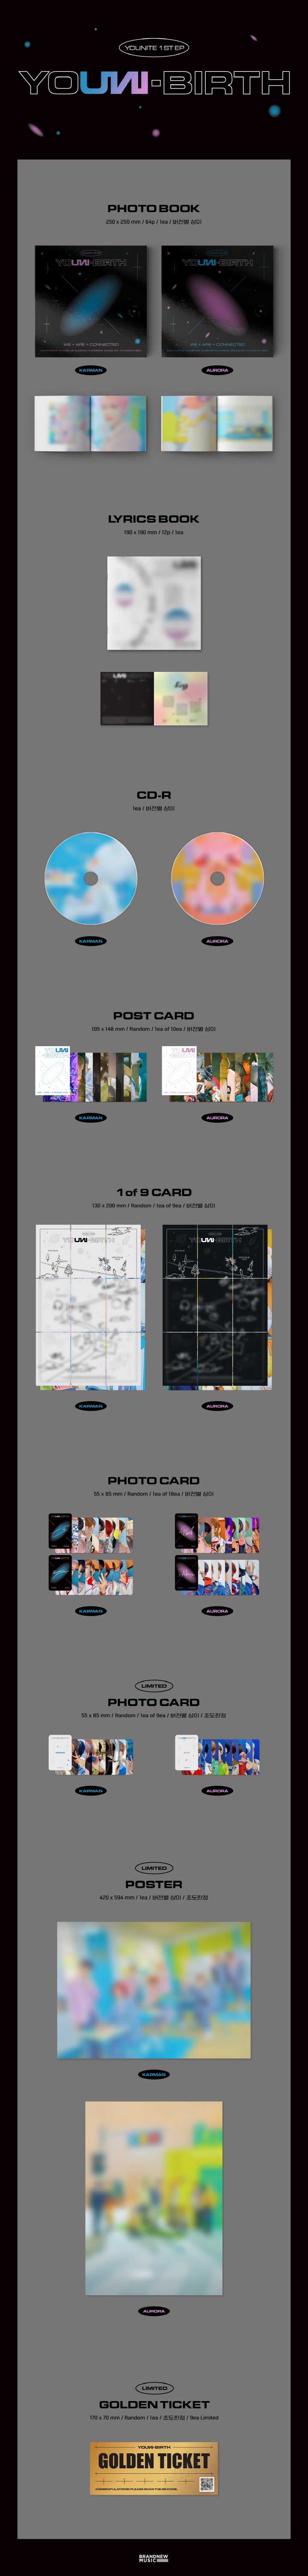 1 CD
1 Photo Book (64 pages)
1 Lyrics Book (12 pages)
1 Post Card (random out of 10 types)
1 Card (random out of 9 types)
...